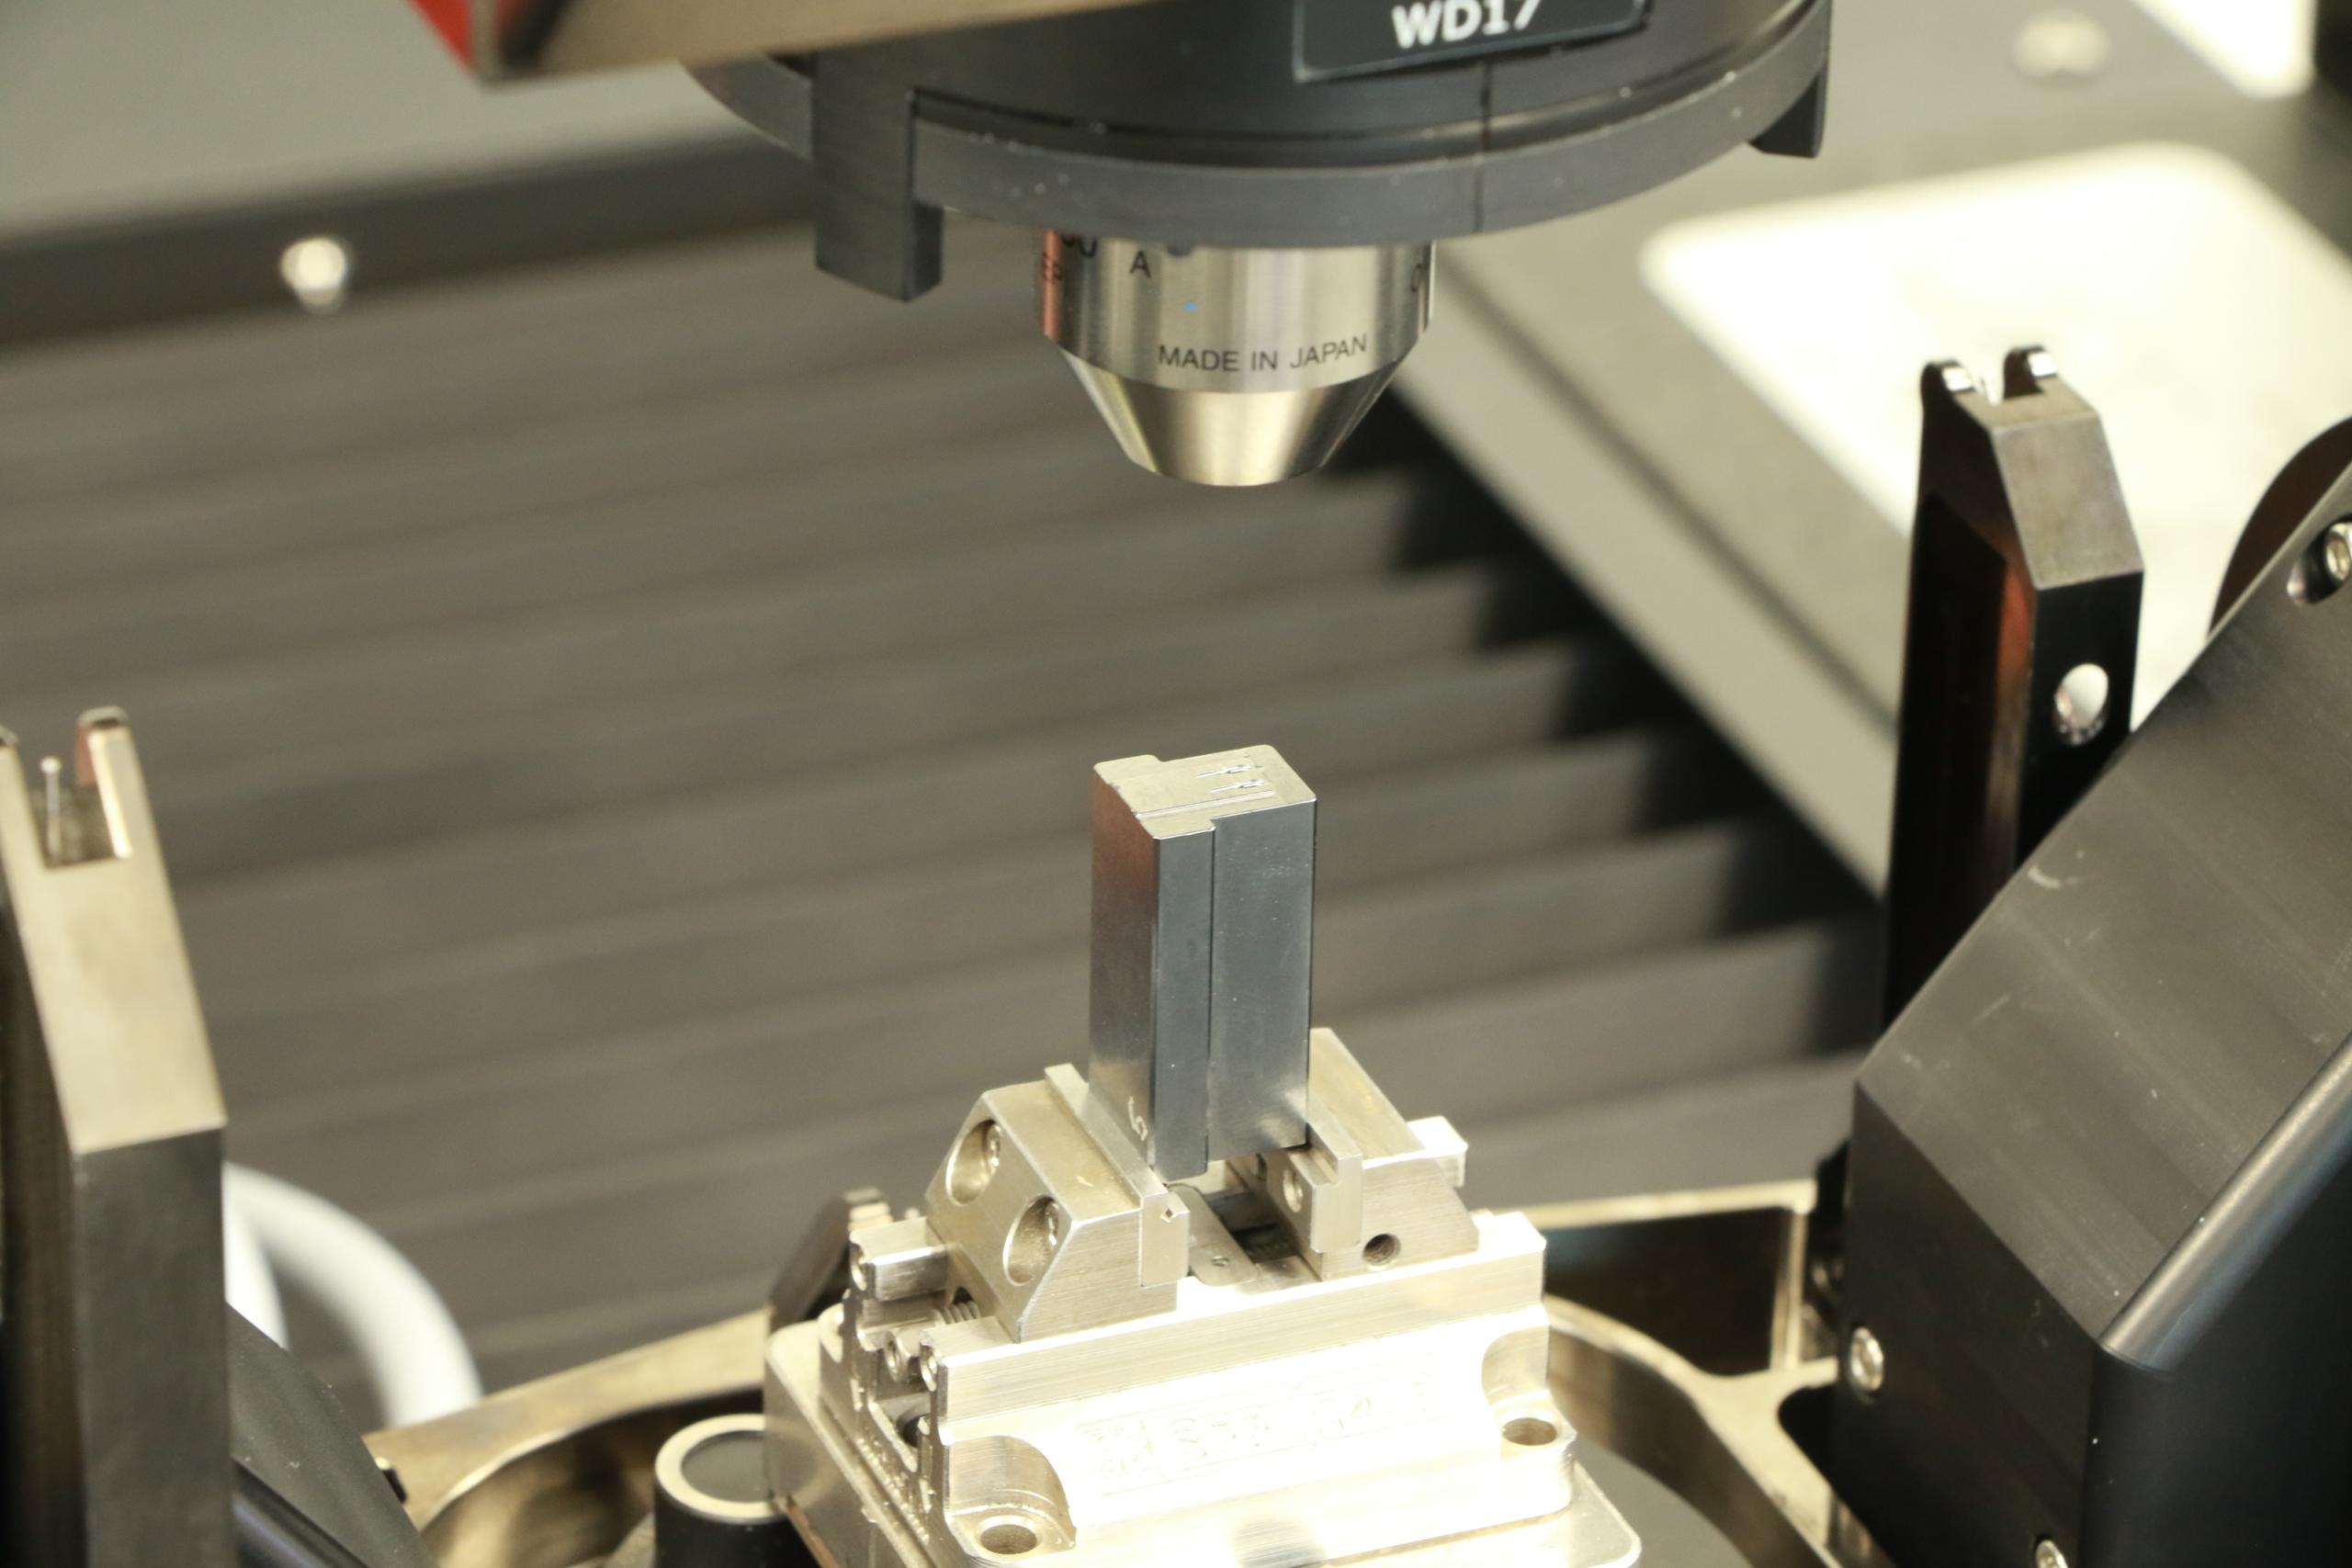 Optical measurement of a stamping tool